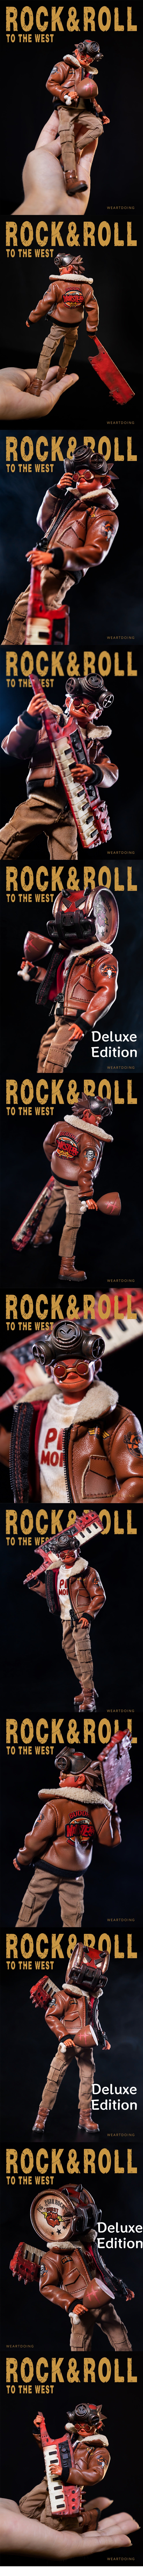 WeArtDoing Rock&Roll to the West Pigsy 1/12 Collectible Action Figurine